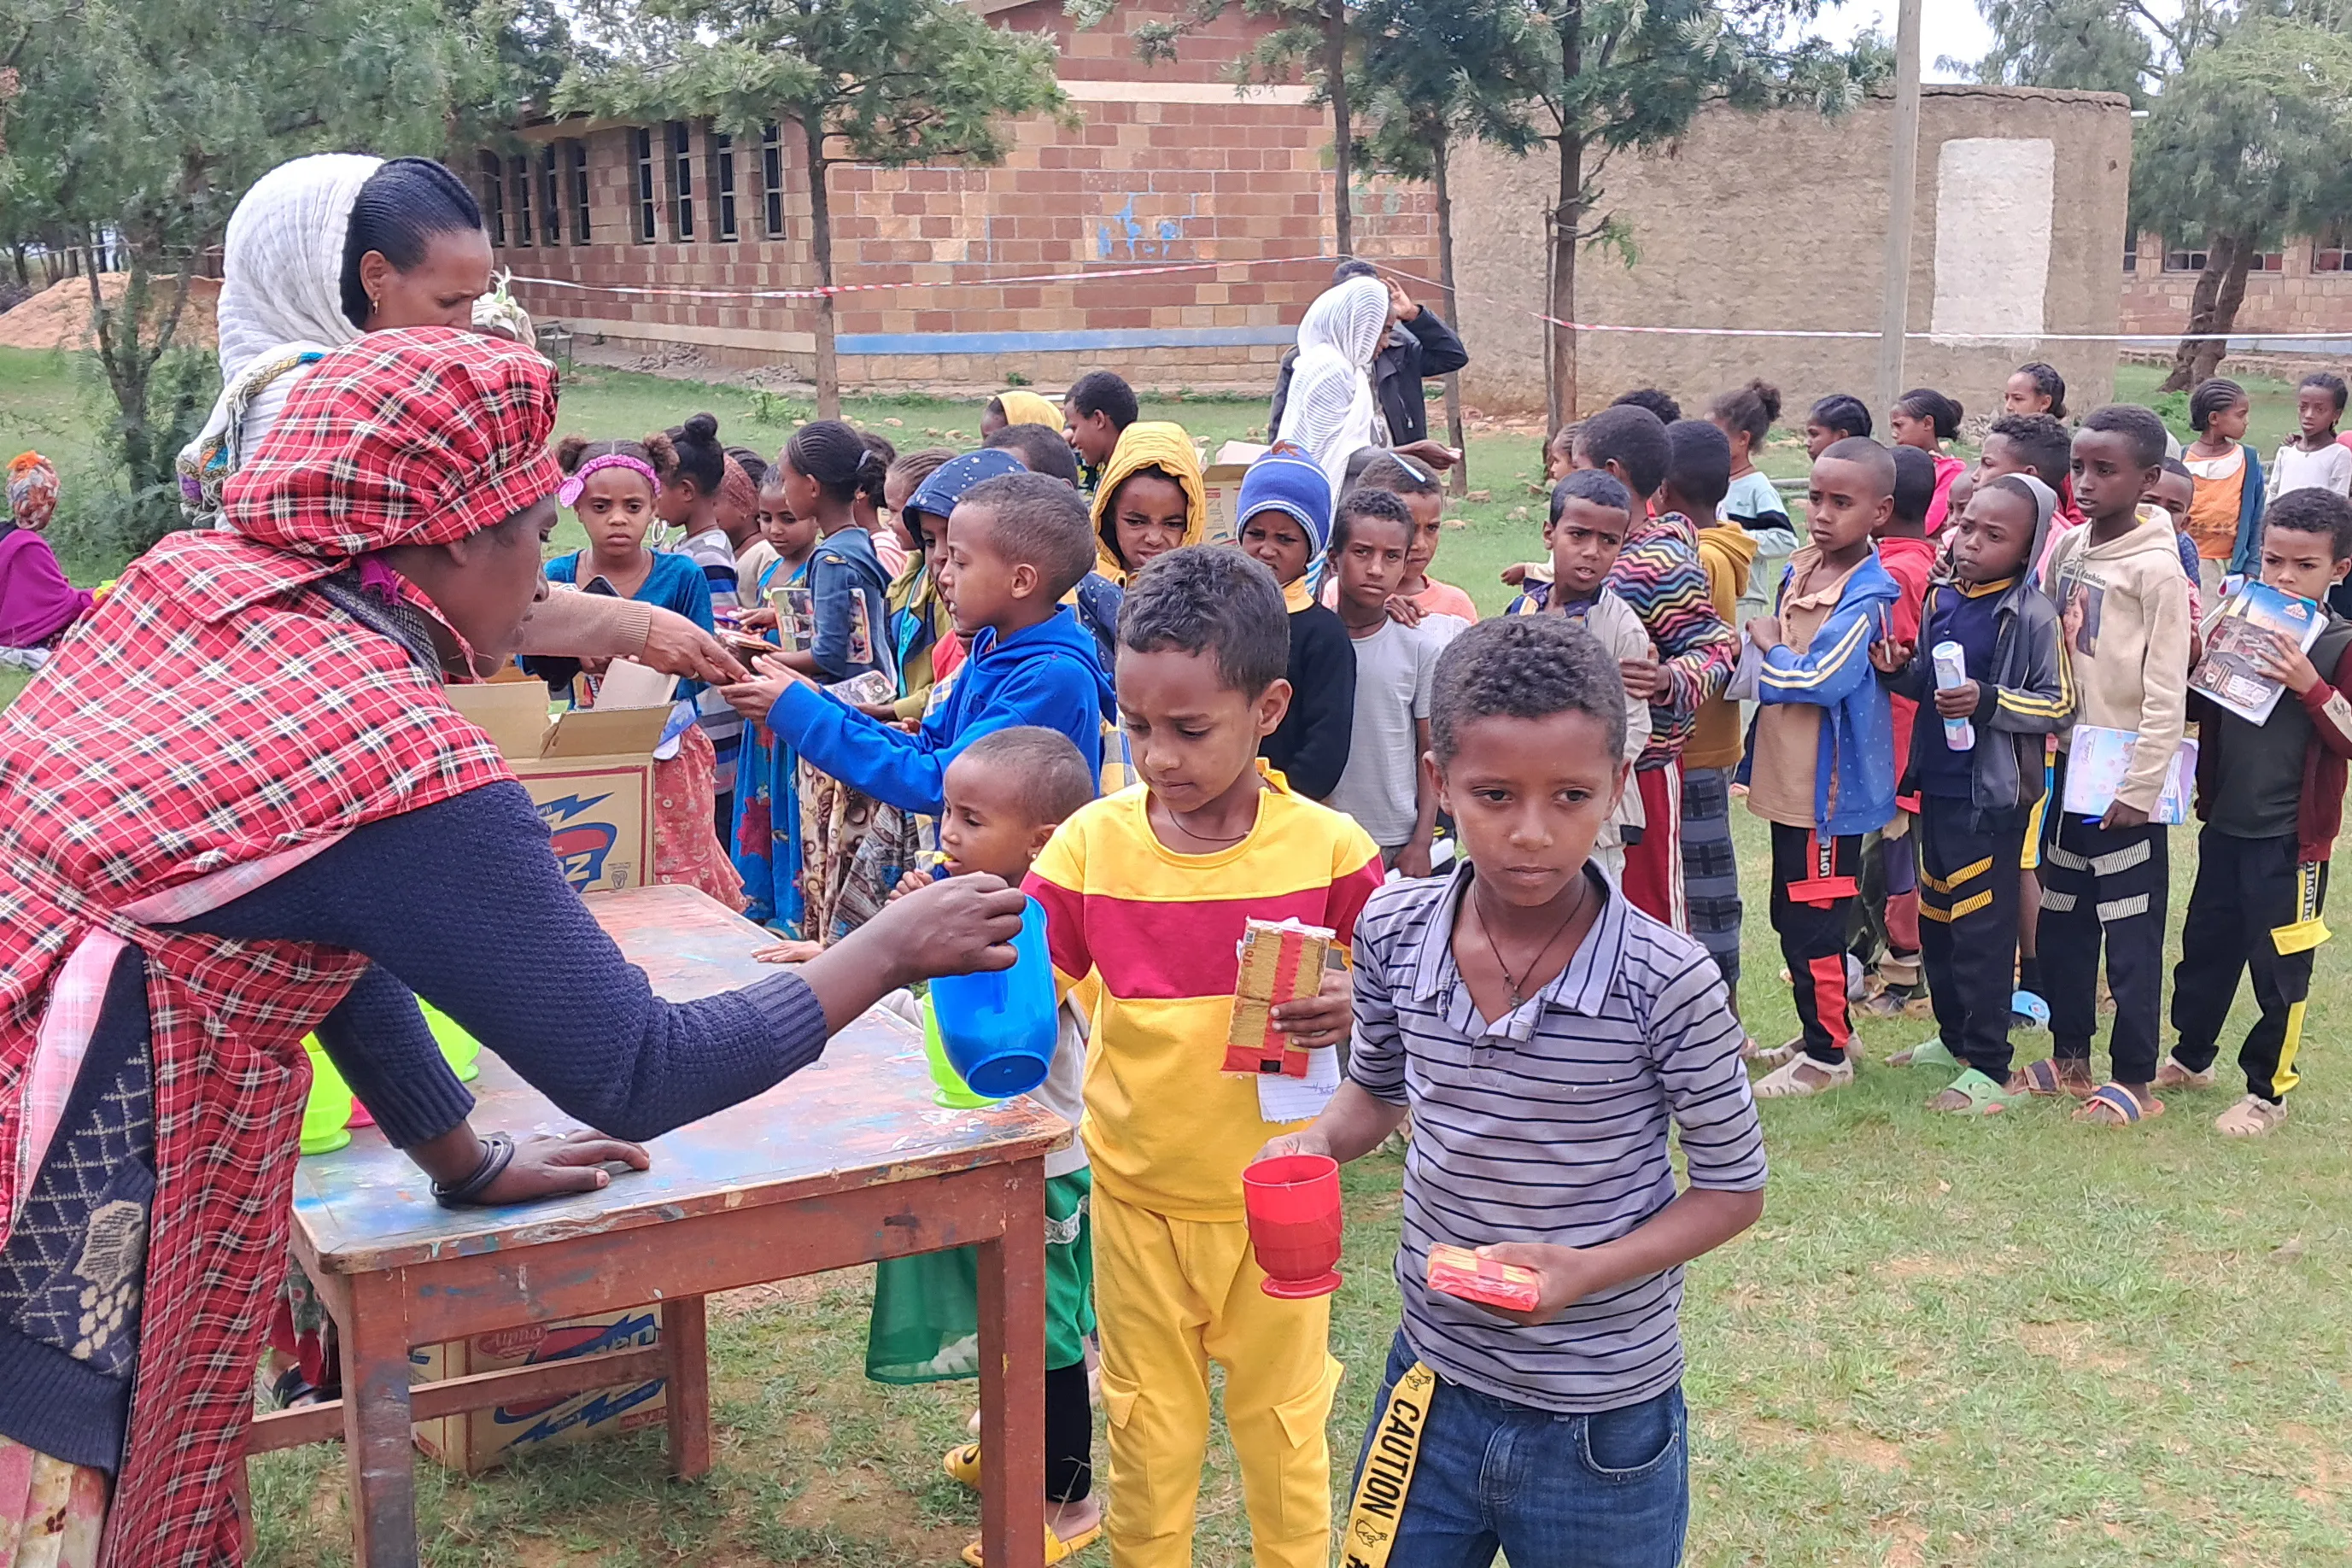 Schoolchildren in Tigray, Ethiopia, eat biscuits and tea provided by Mary's Meals. Copyright Mary's Meals